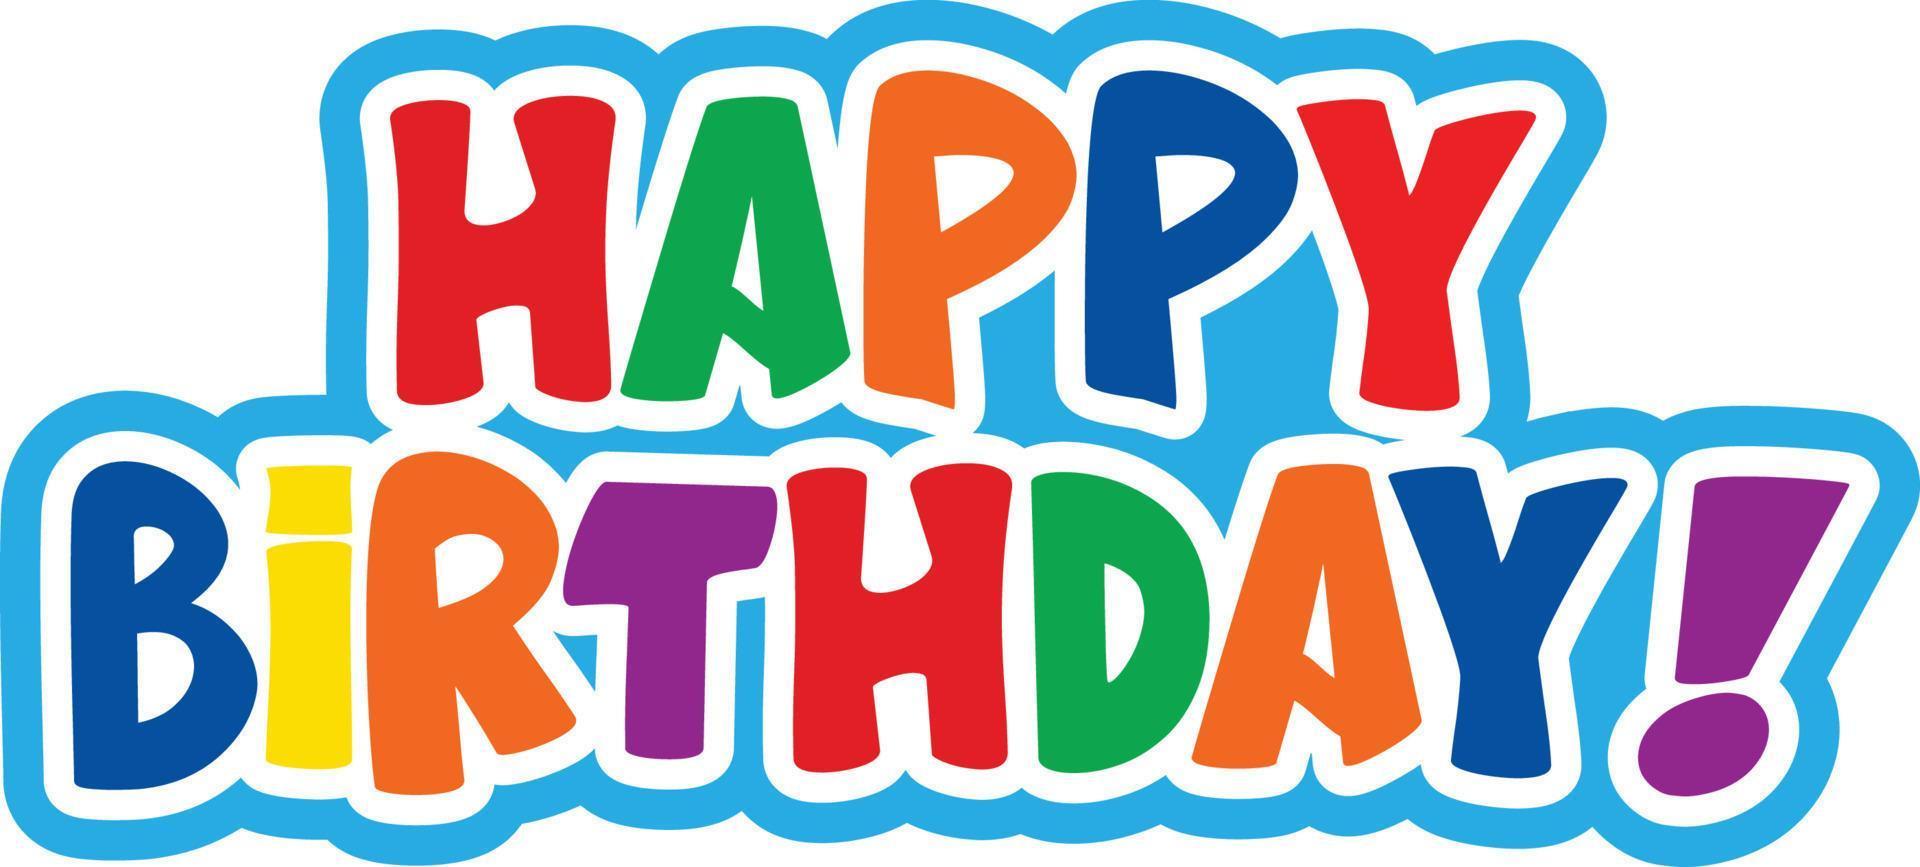 Happy Birthday Colorful Greeting and Text vector